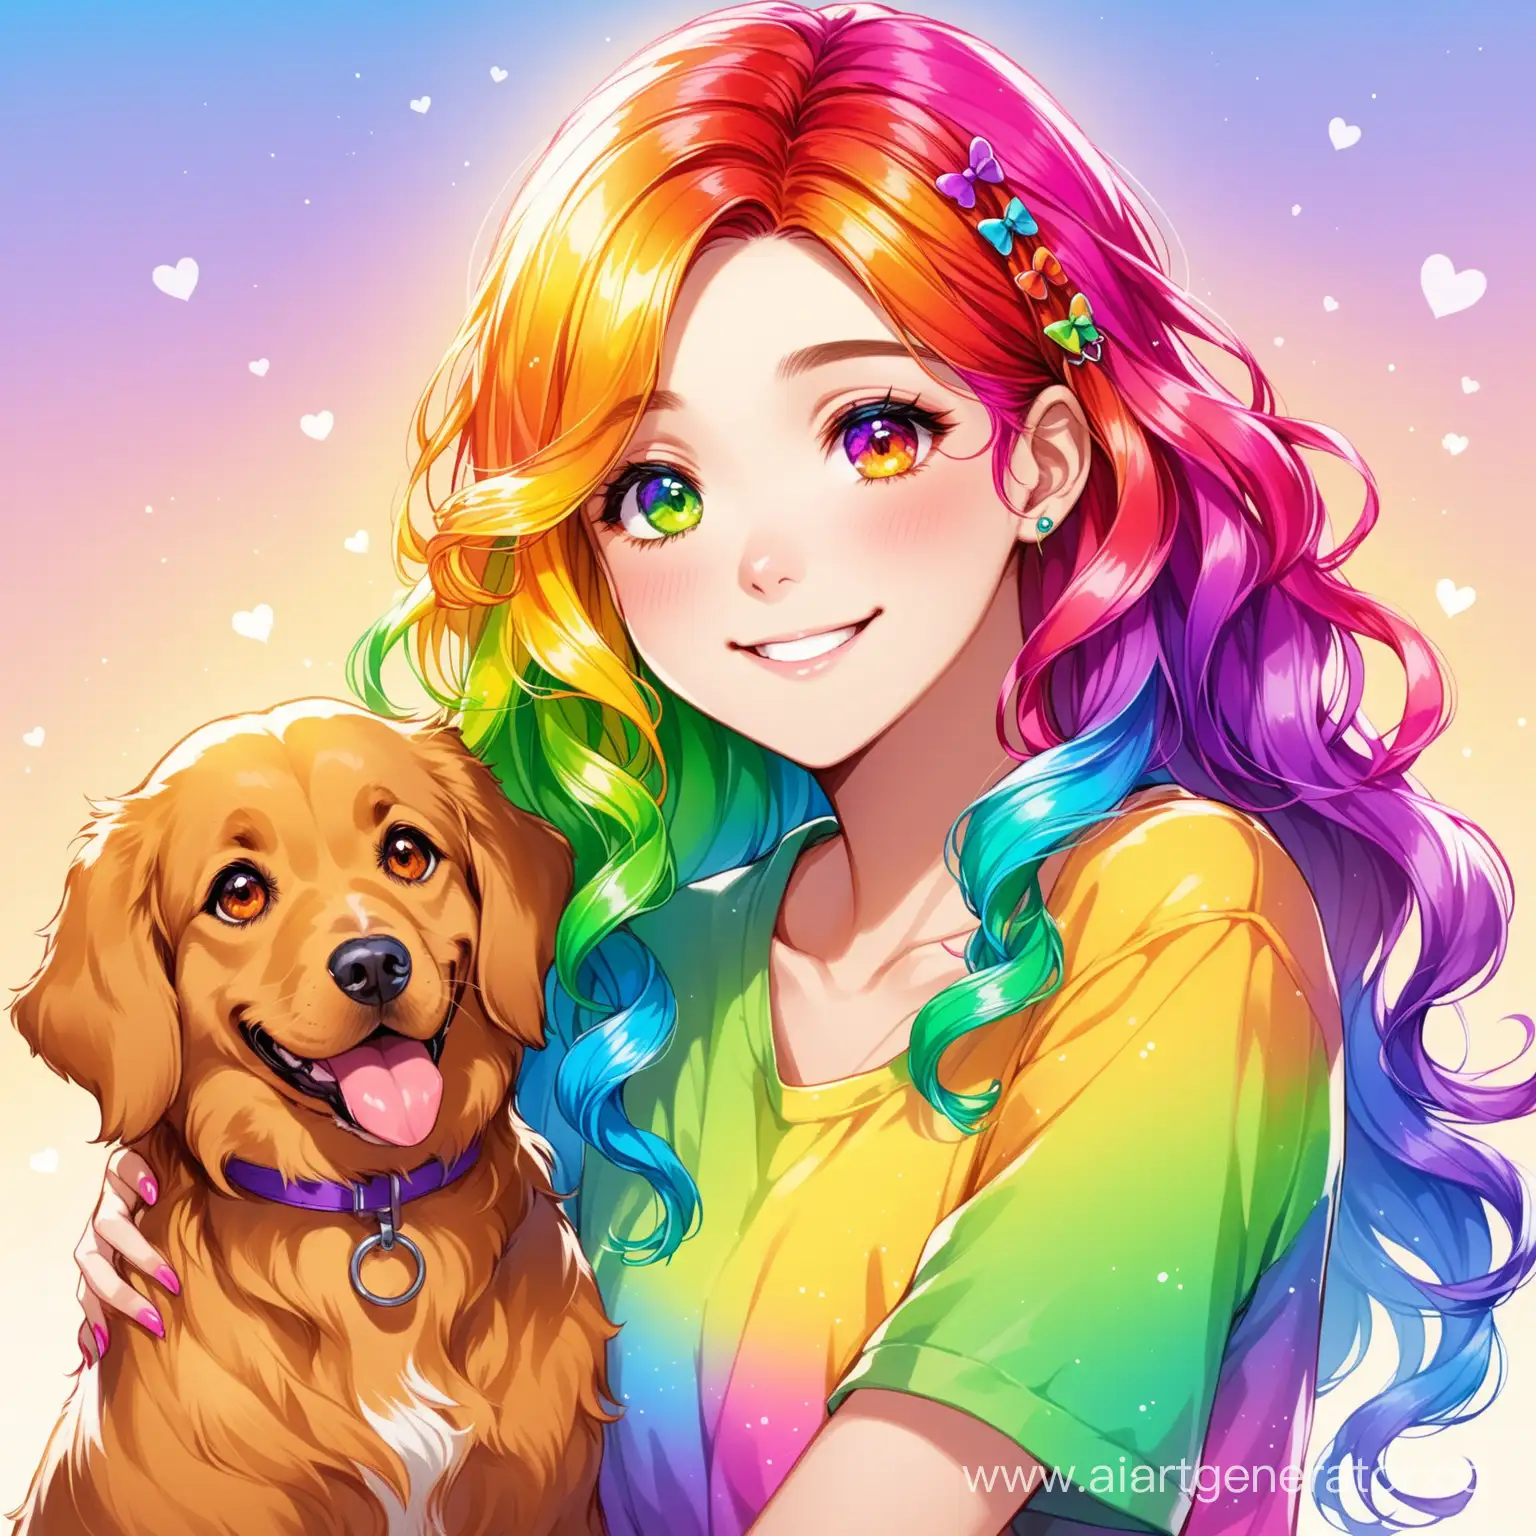 Vibrant-Young-Woman-with-Rainbow-Hair-and-Playful-Dog